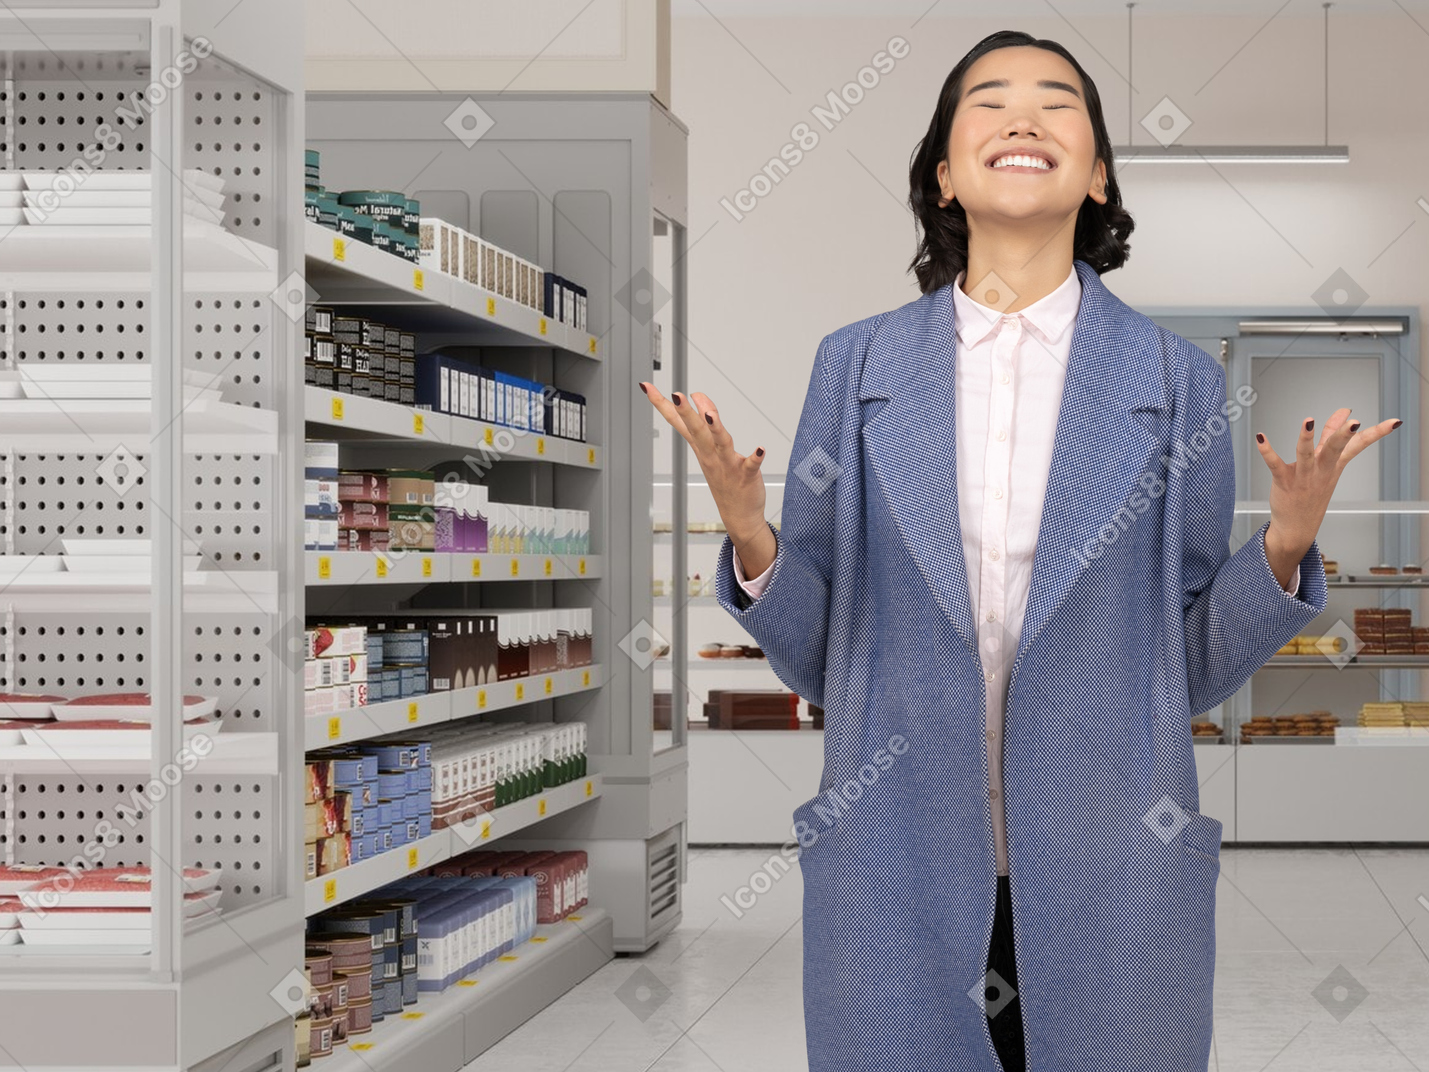 A cheerful woman standing in a supermarket